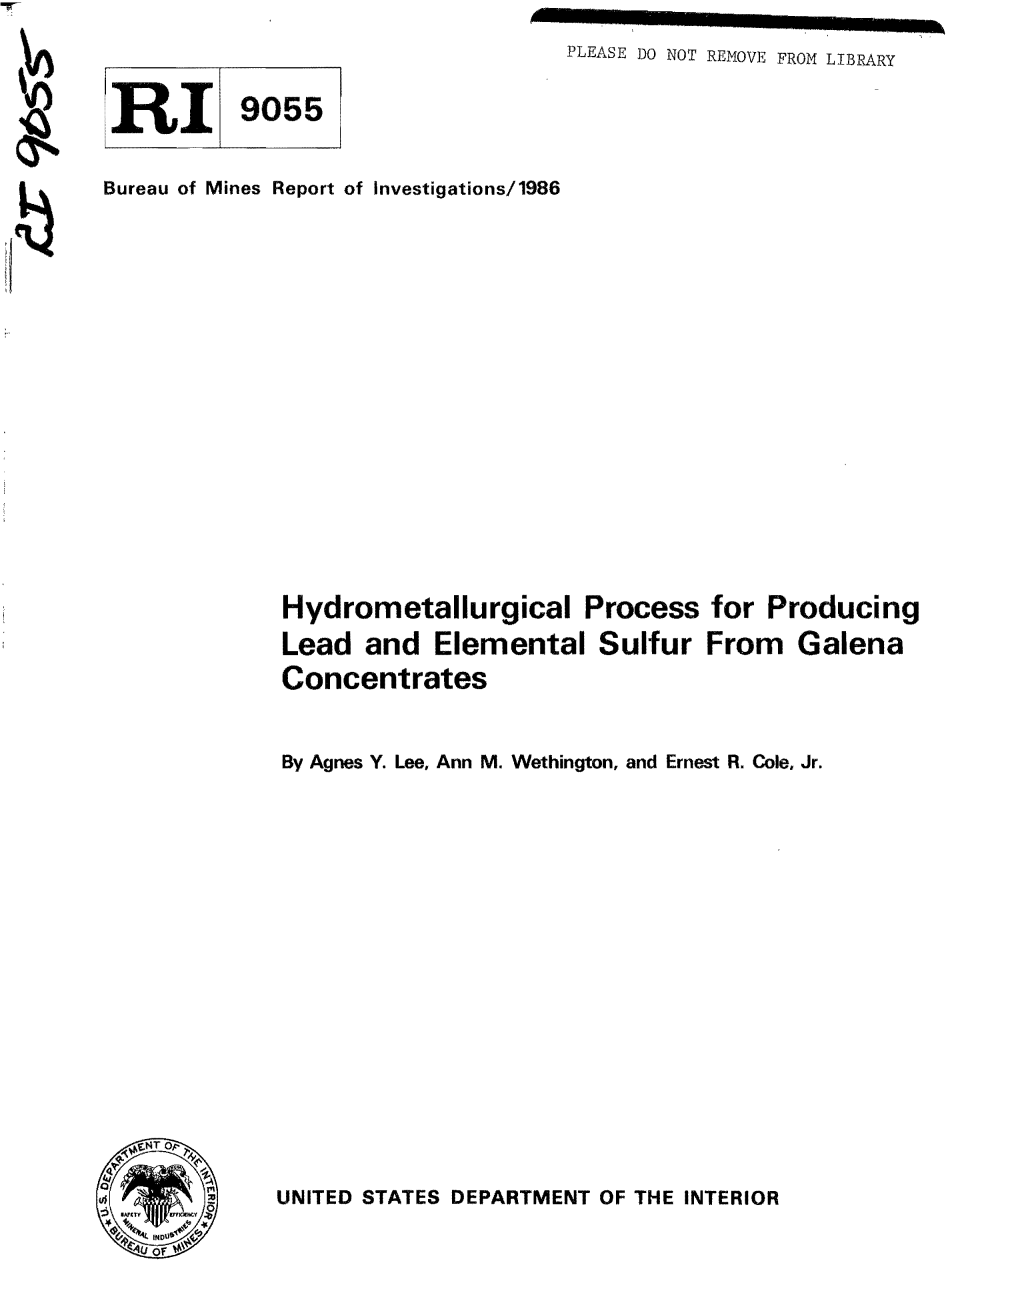 Hydrometallurgical Process for Producing Lead and Elemental Sulfur from Galena Concentrates